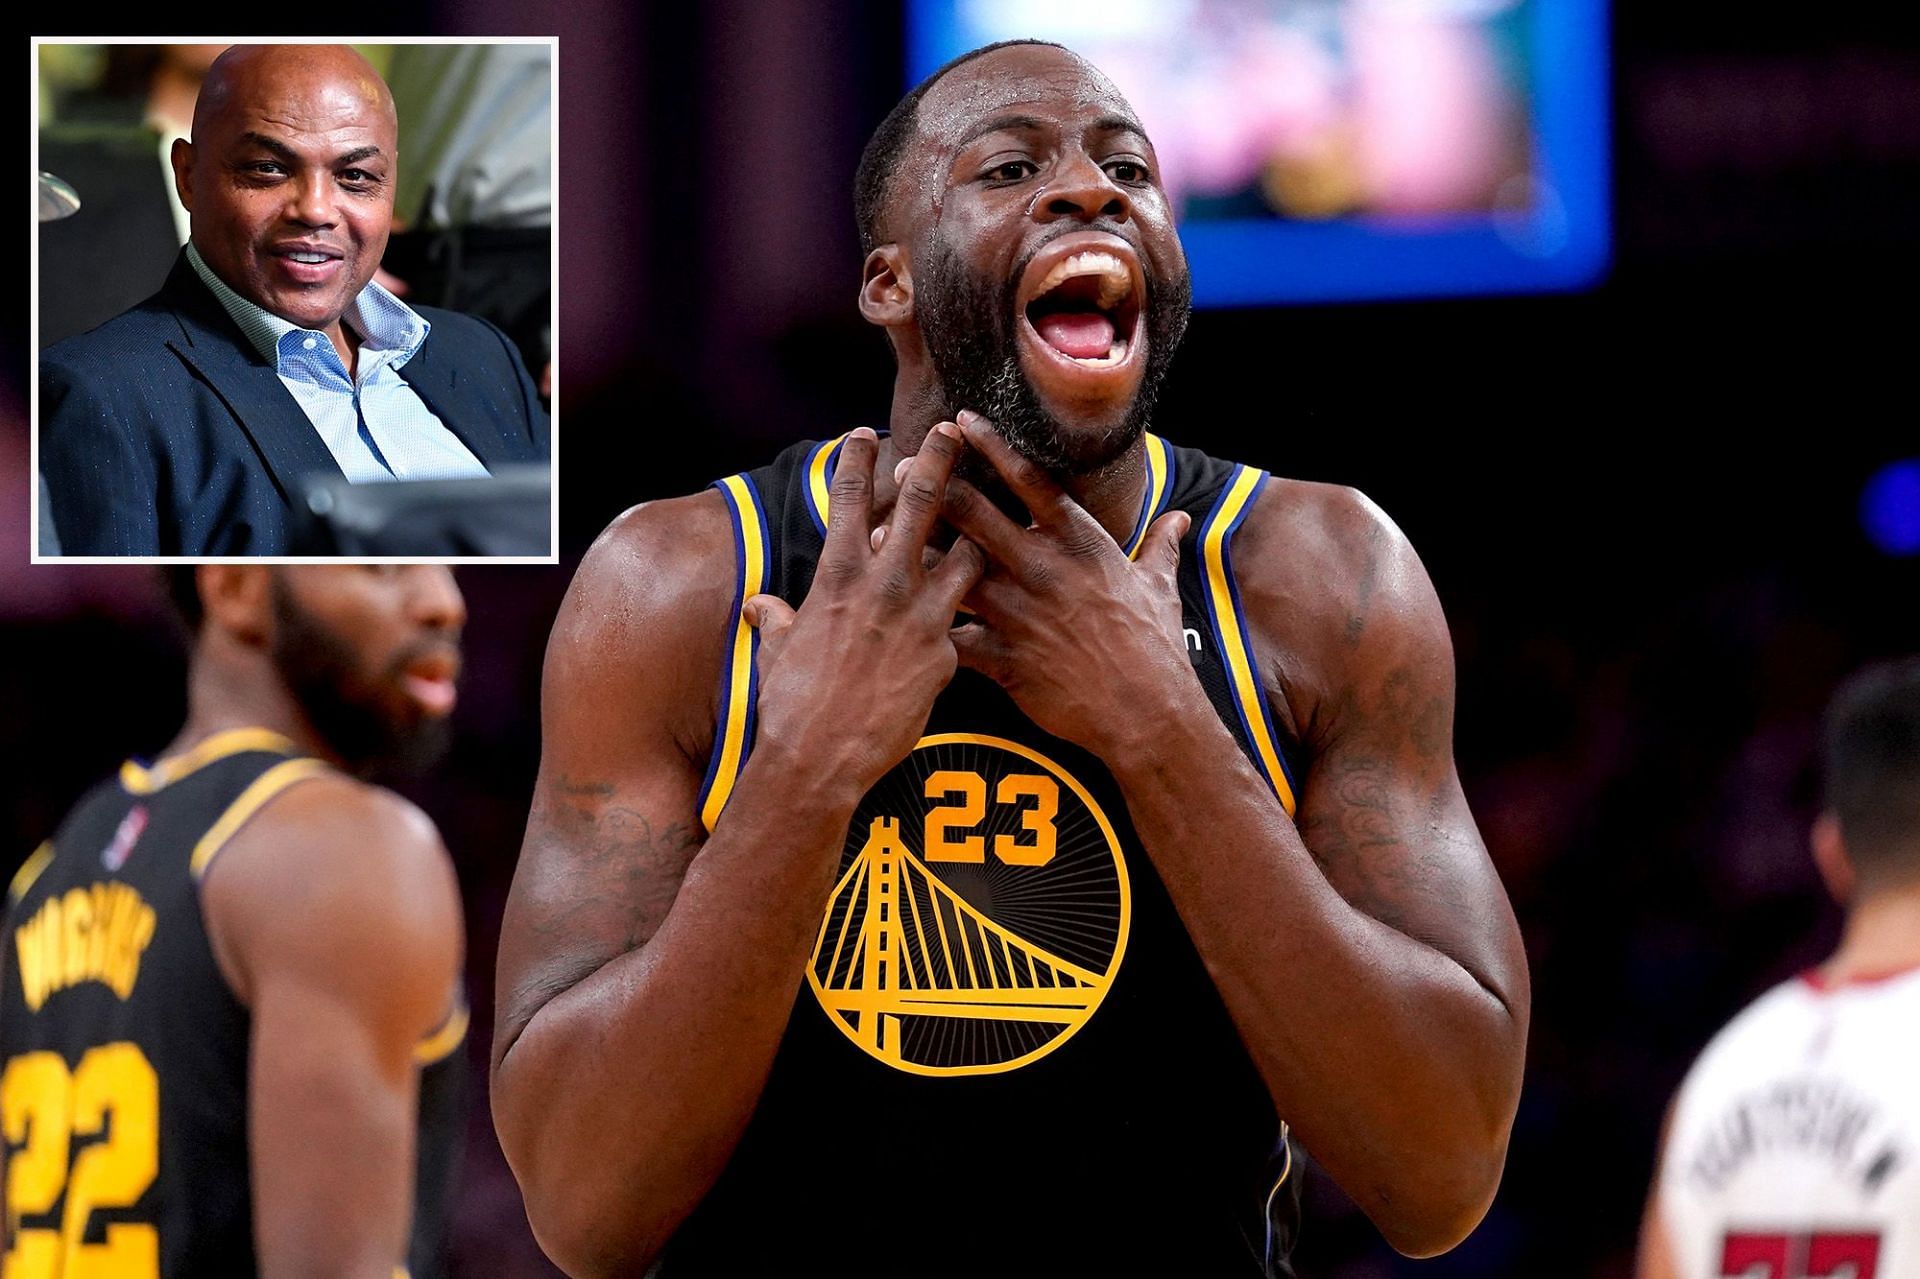 NBA on TNT colleagues Charles Barkley and Draymond Green have been hilariously going at it since the Western Conference finals started. [Photo: New York Post]